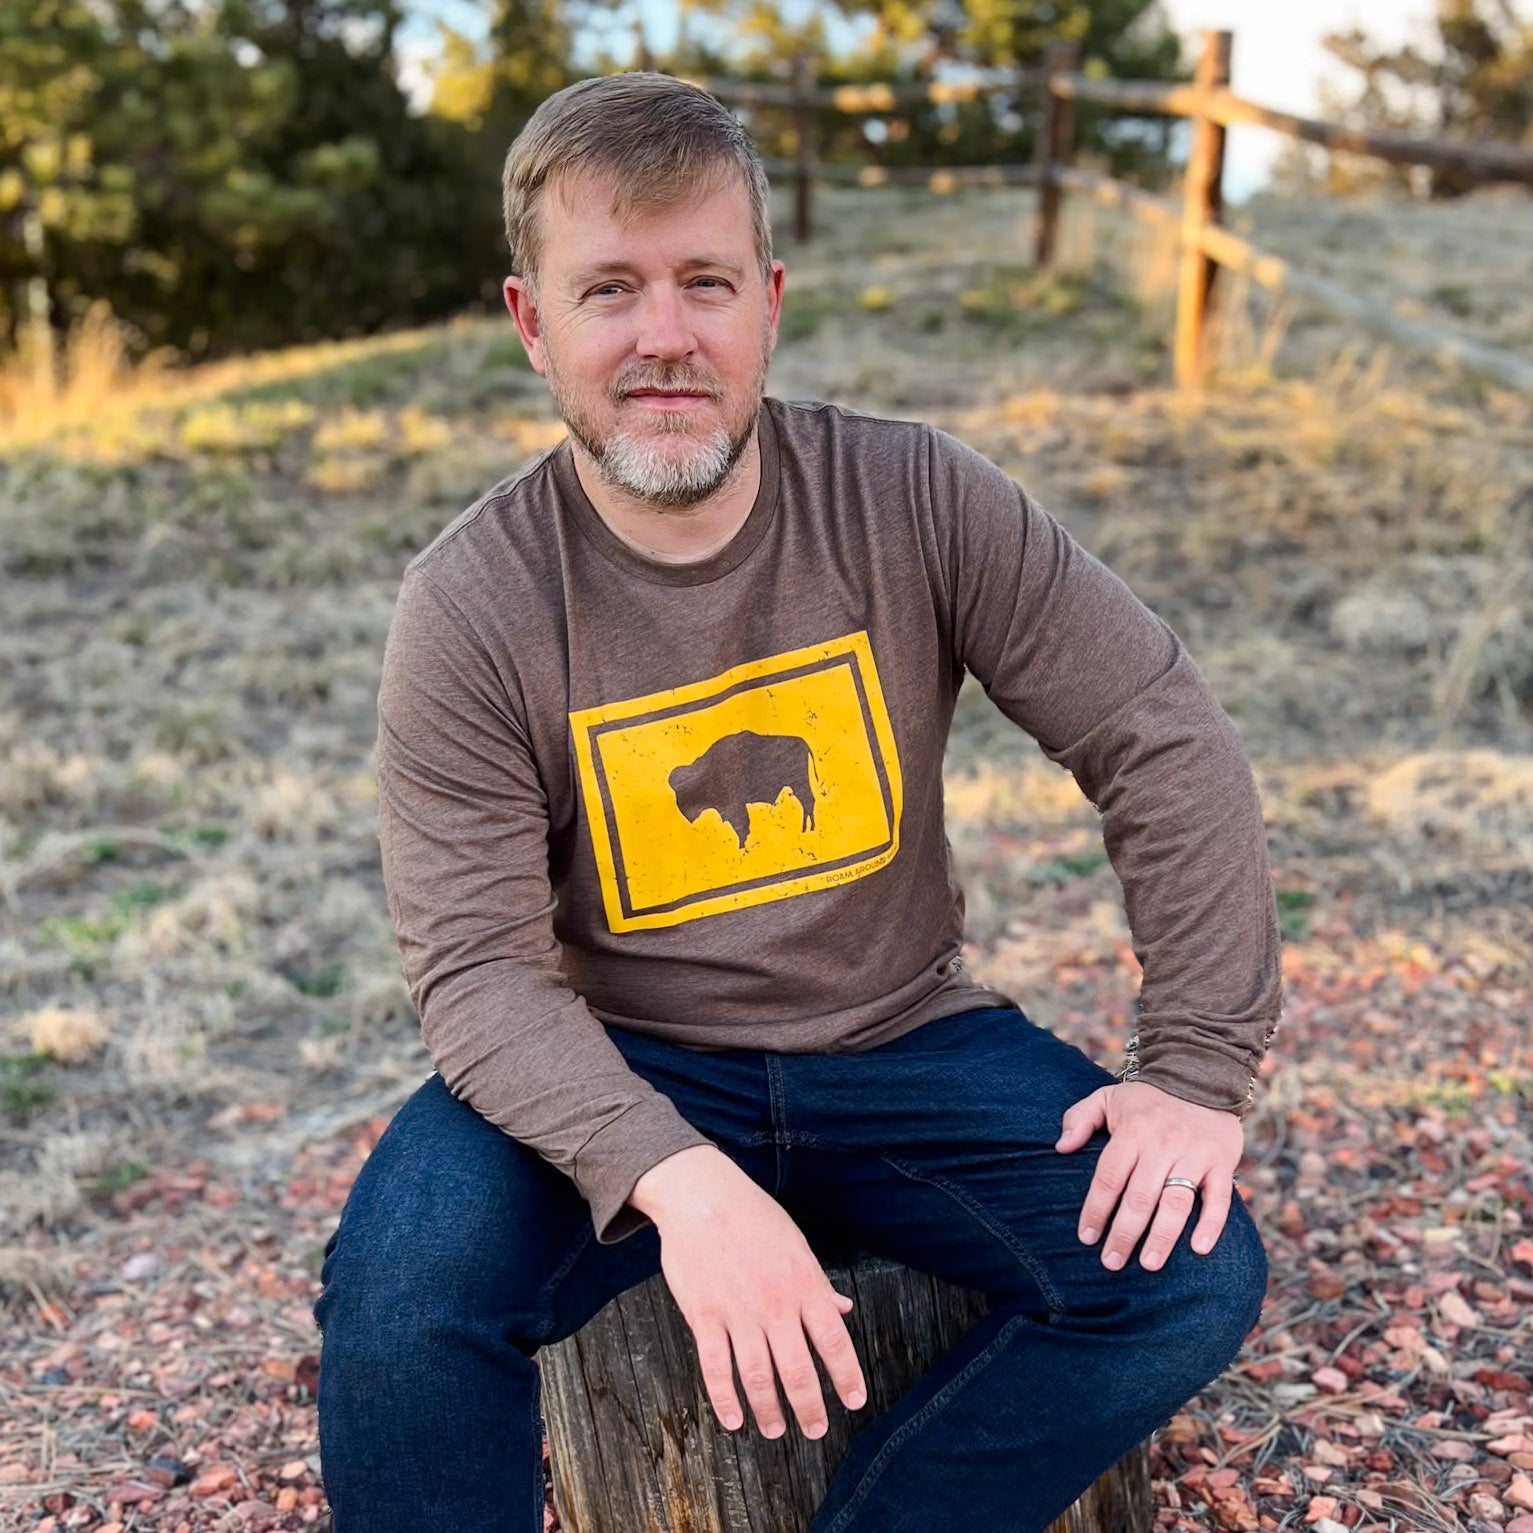 Long sleeve bison t-shirt. Wyoming long sleeve tee. Wyoming t-shirt. Roam Around Wear is a Wyoming t-shirt company based out of Gillette, Wyoming